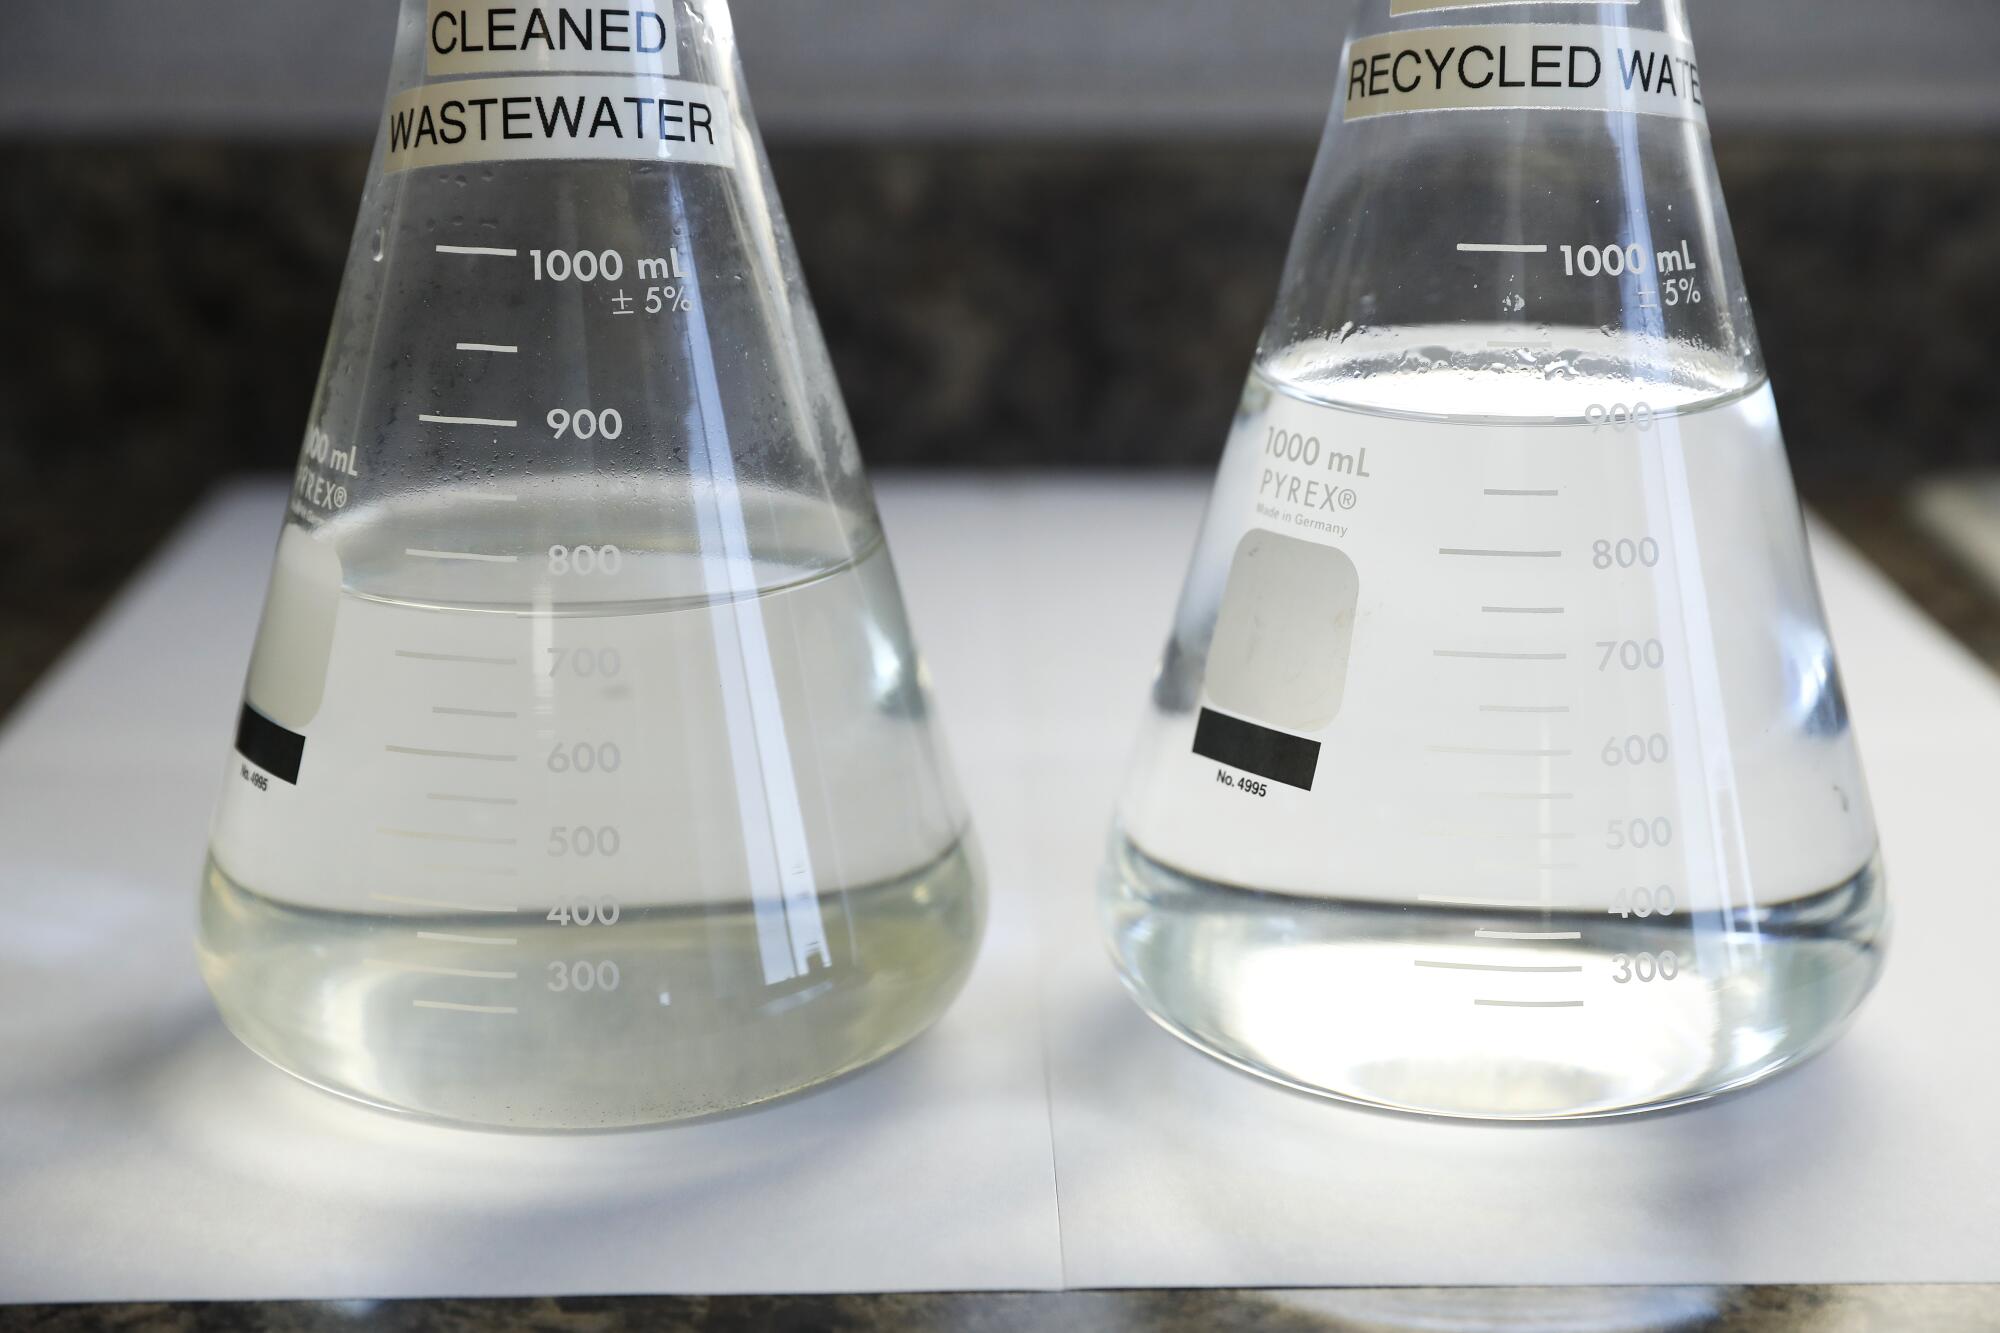 A cleaned wastewater sample, left, and a purified recycled water sample, right.